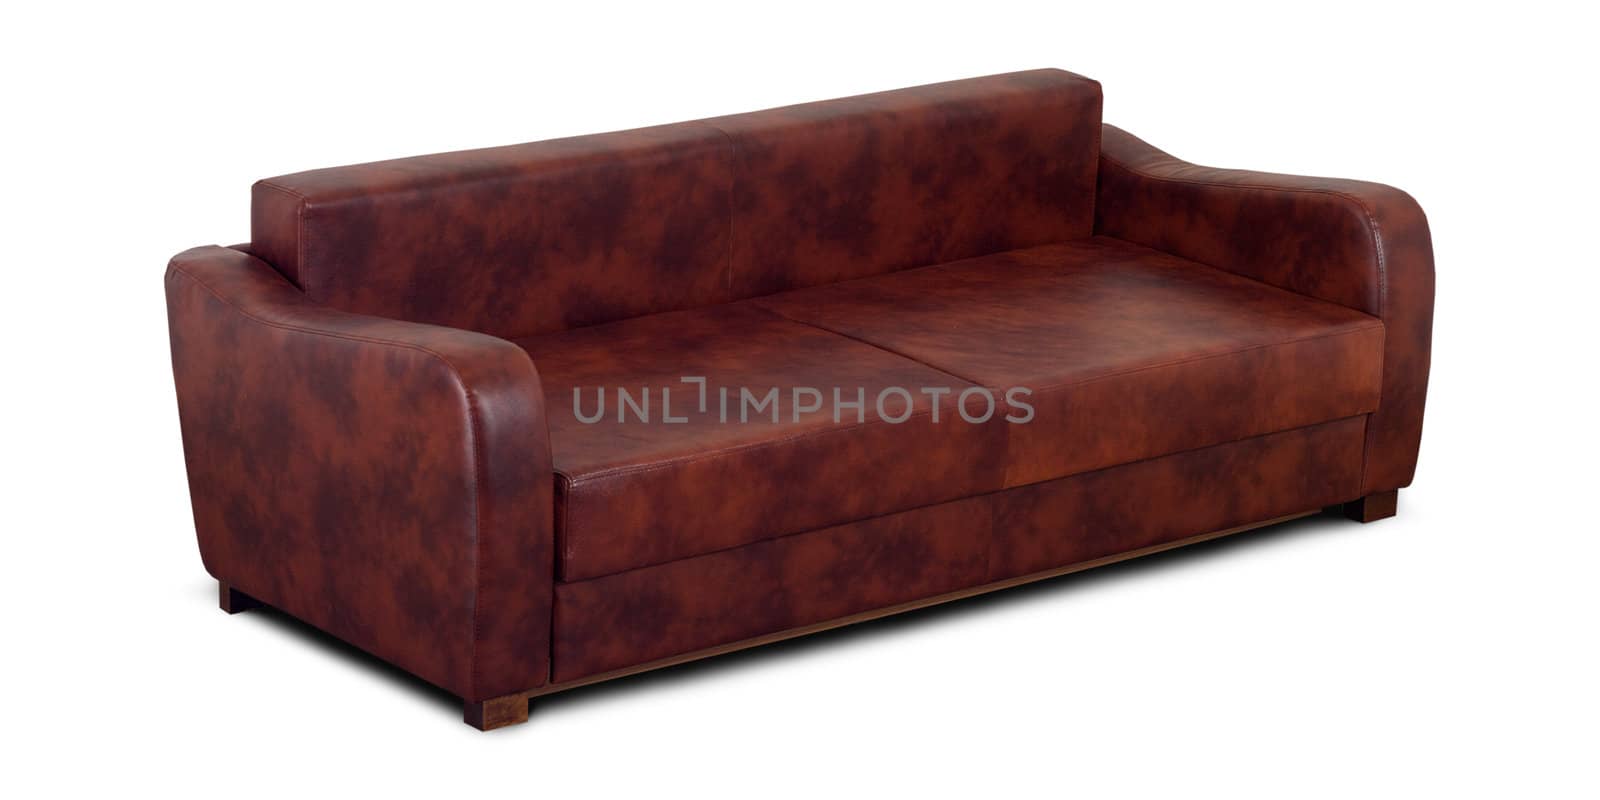 A small leather sofa isolated on a white background.